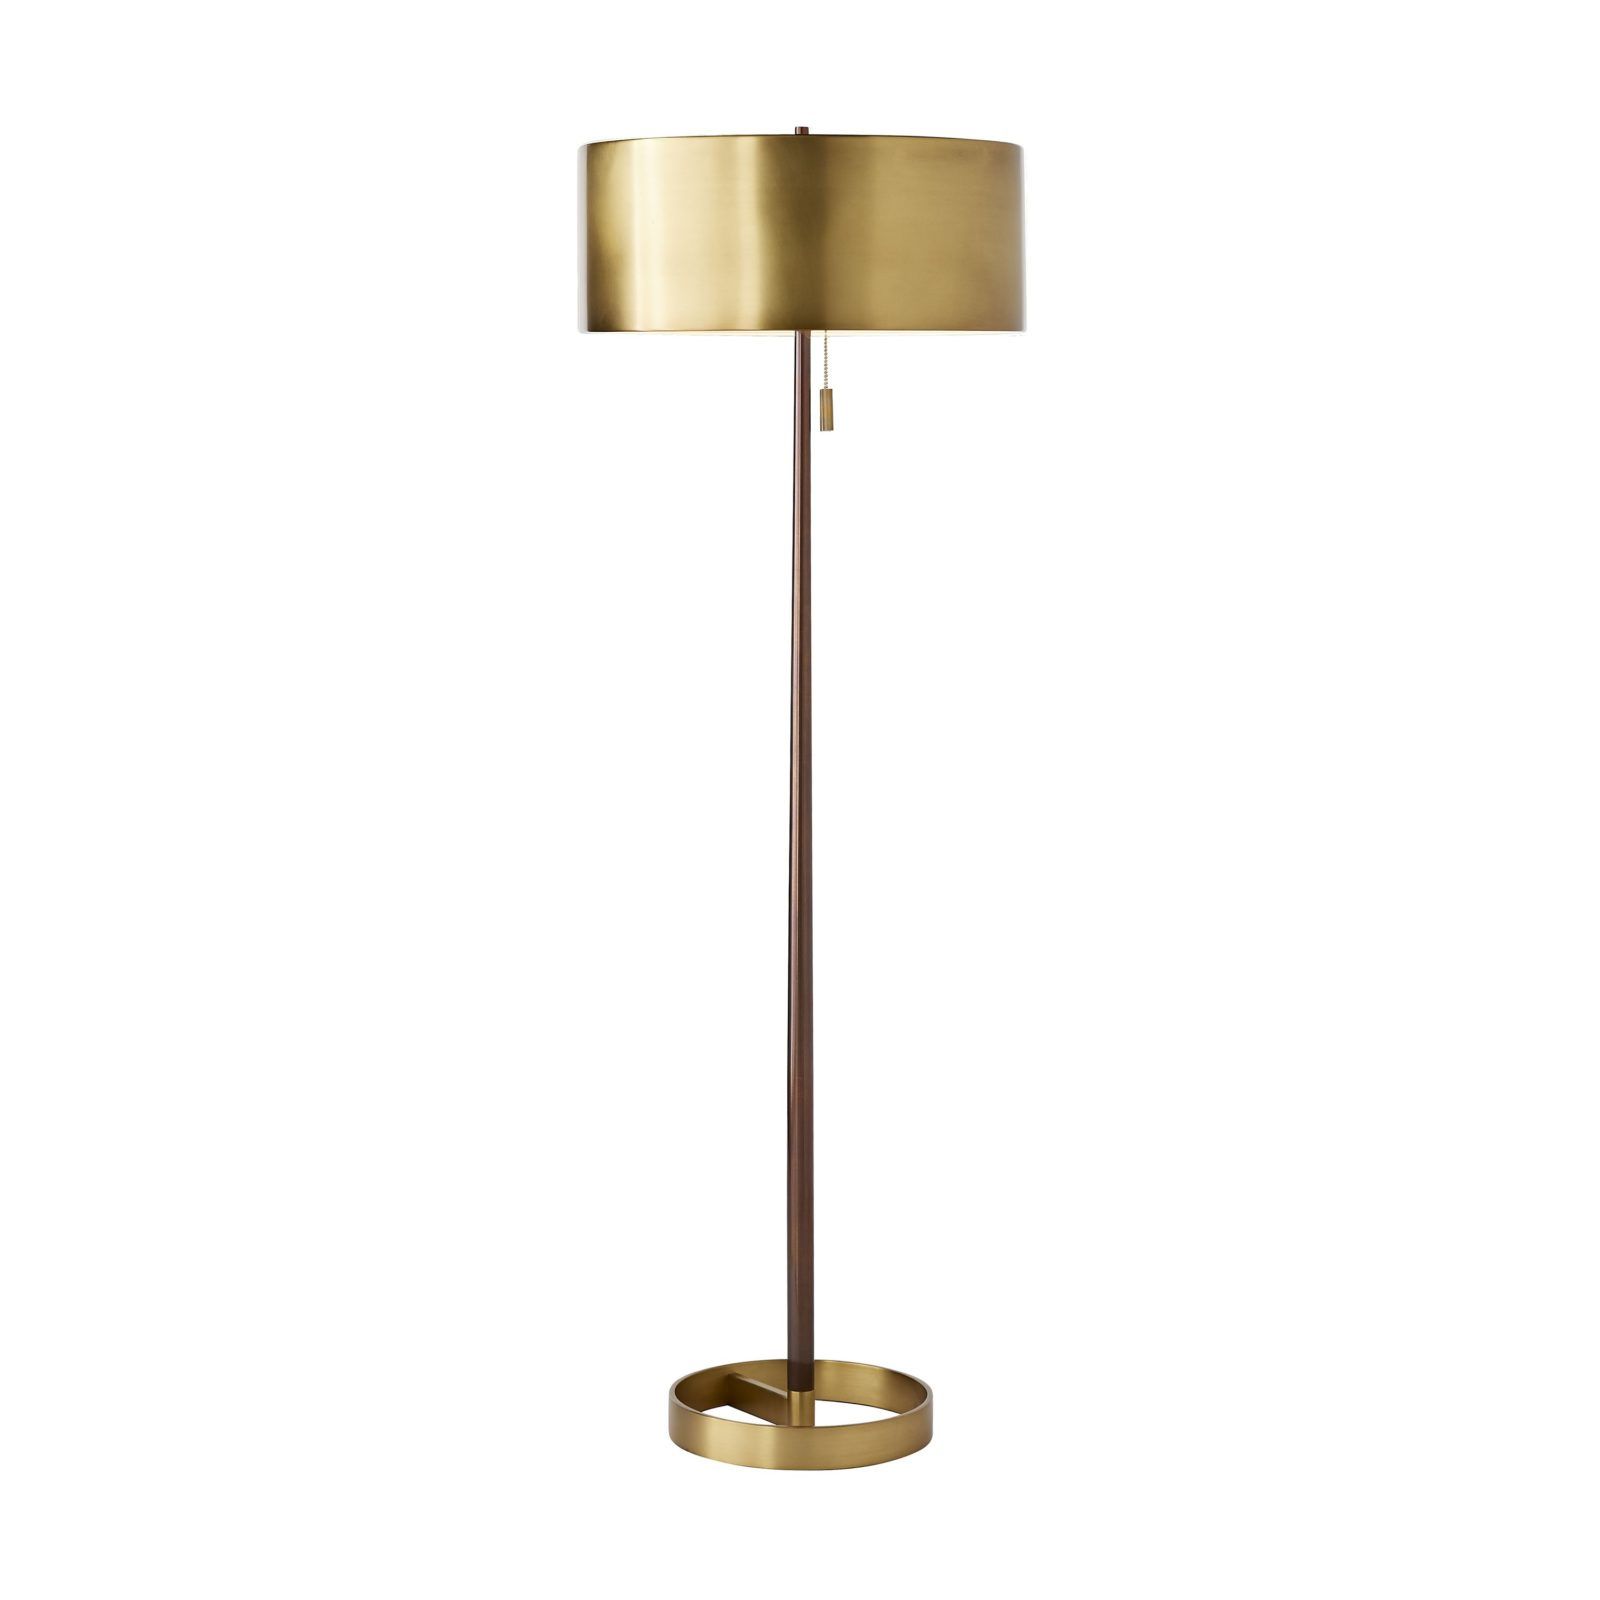 Most Recently Released Antique Brass Standing Lamps Inside Antique Brass Floor Lamp – Modern Antique Brass Floor Lamp (View 1 of 15)